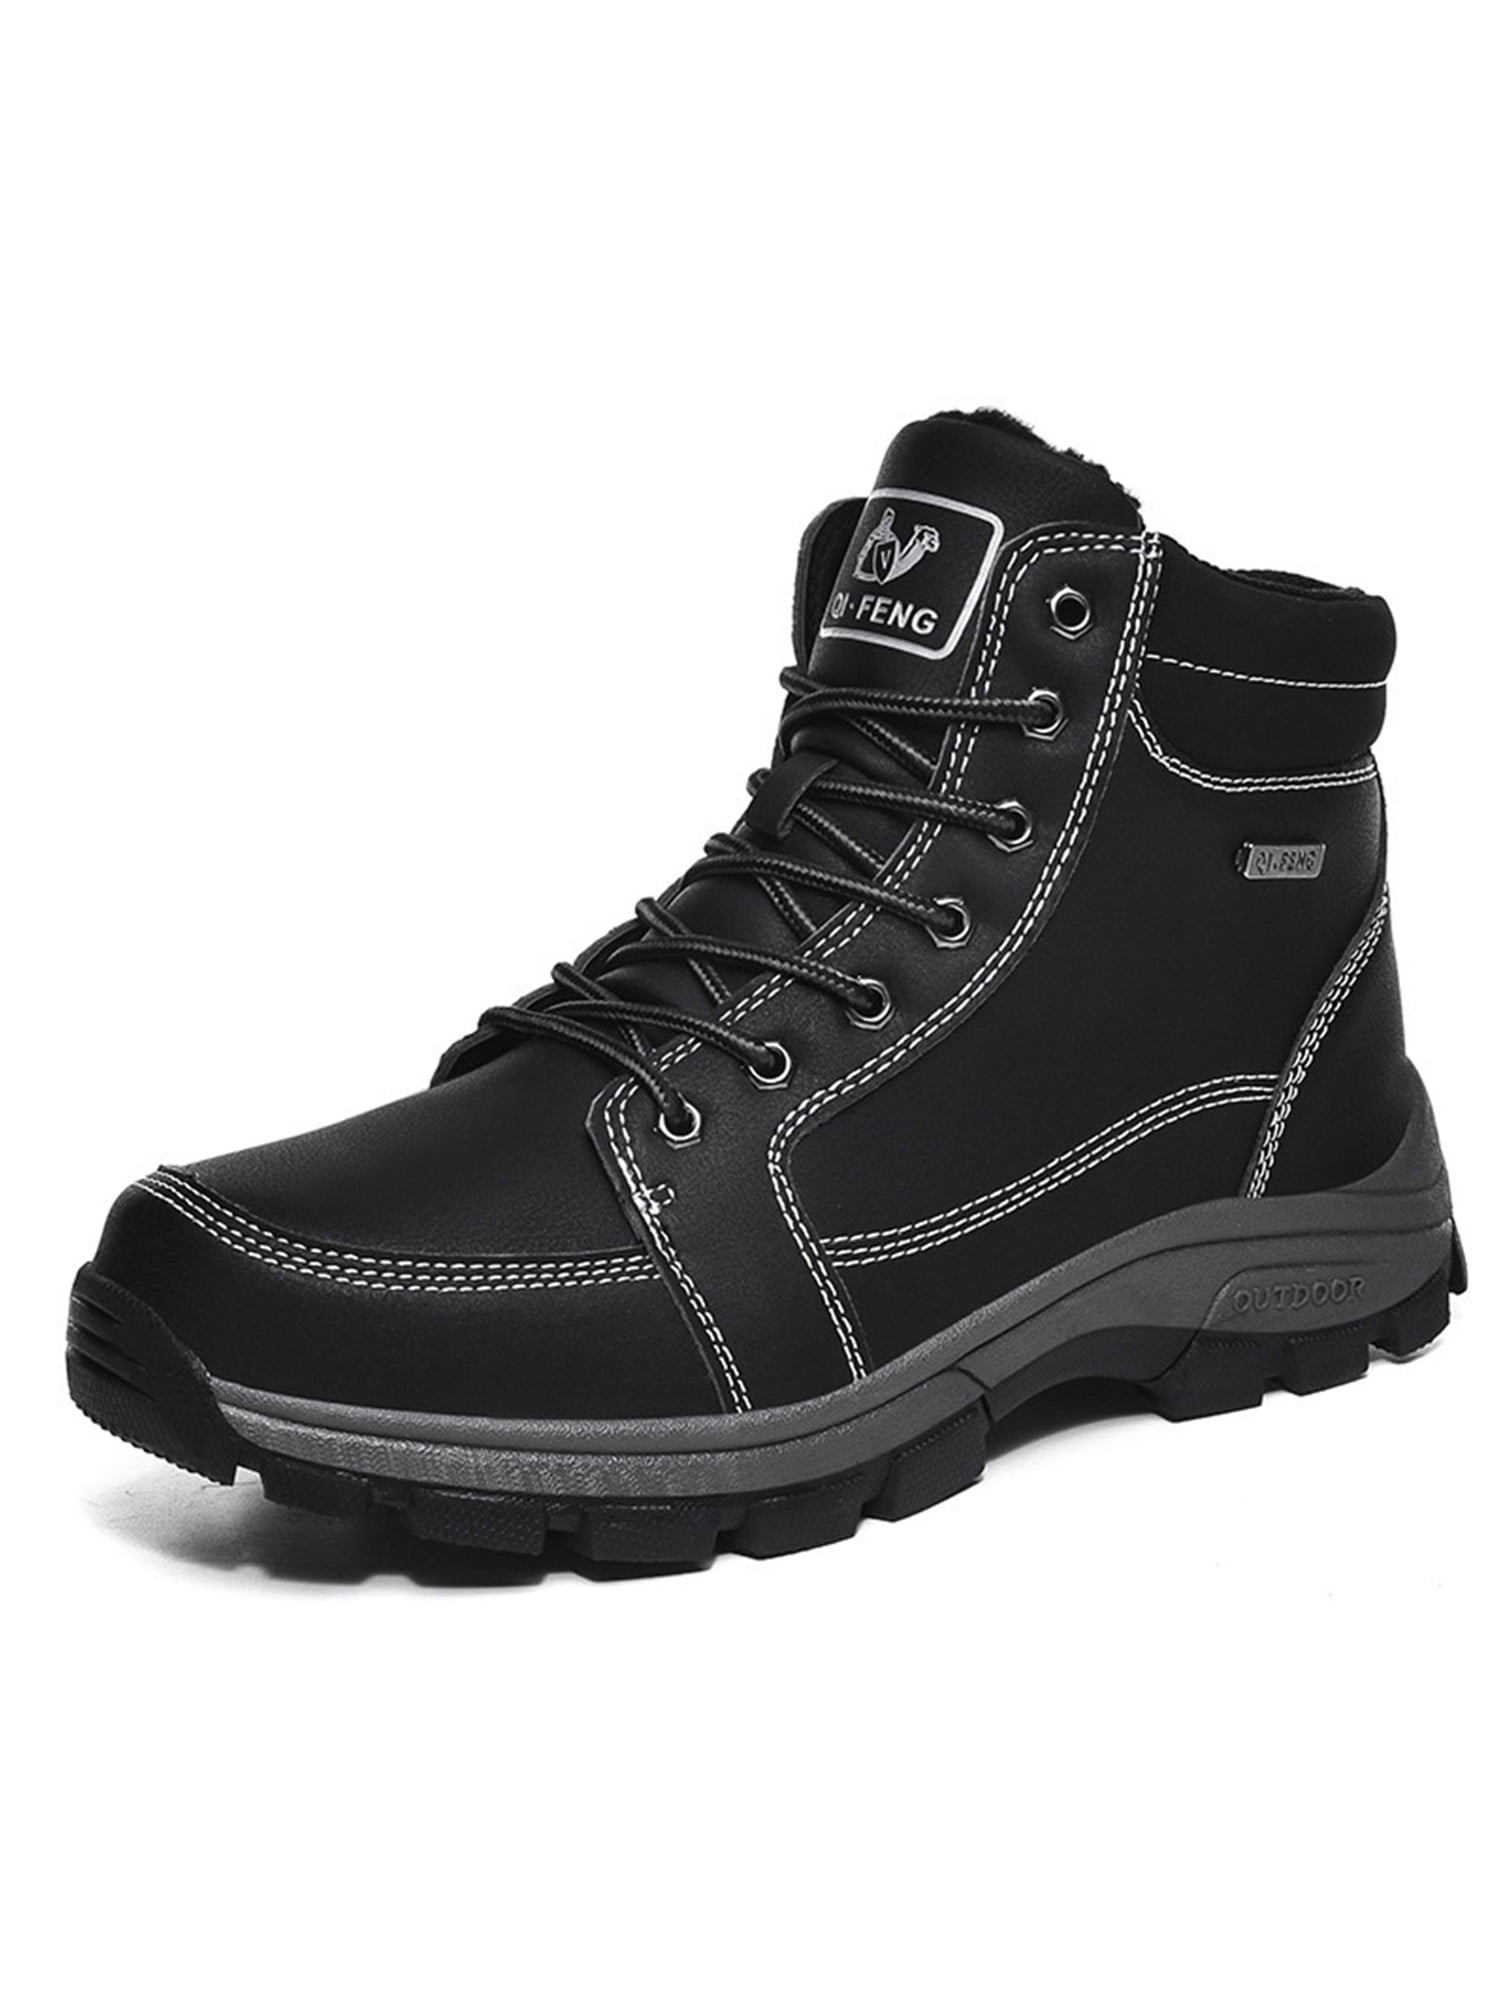 Mens Safety Trainers Work Boots Shoes Steel Toe Cap Hiking sneakers Waterproof 